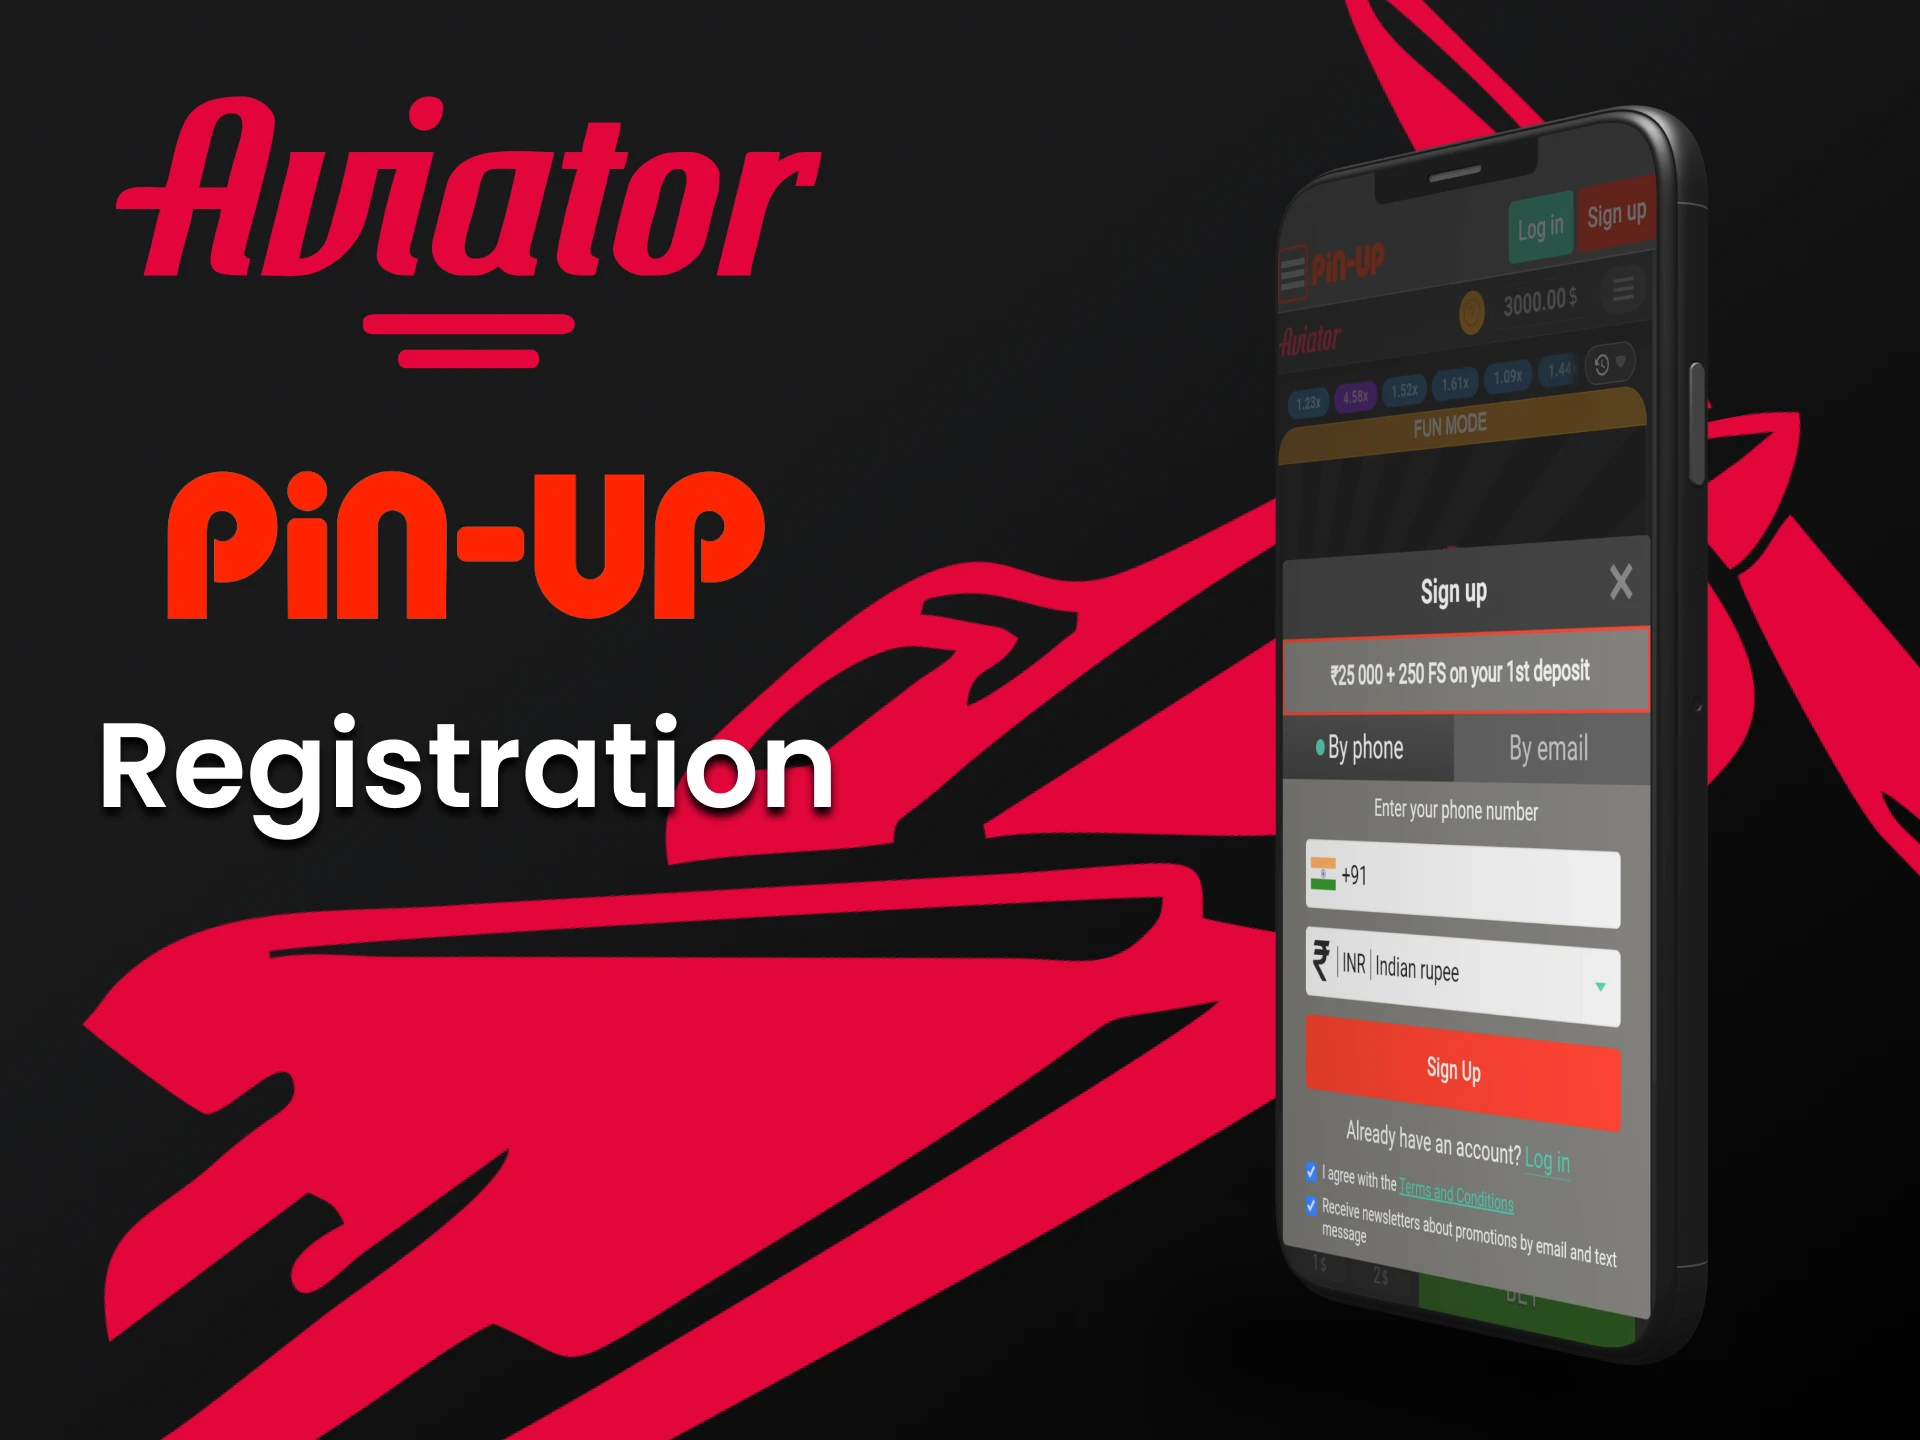 Create a personal Pin Up account to play Aviator.